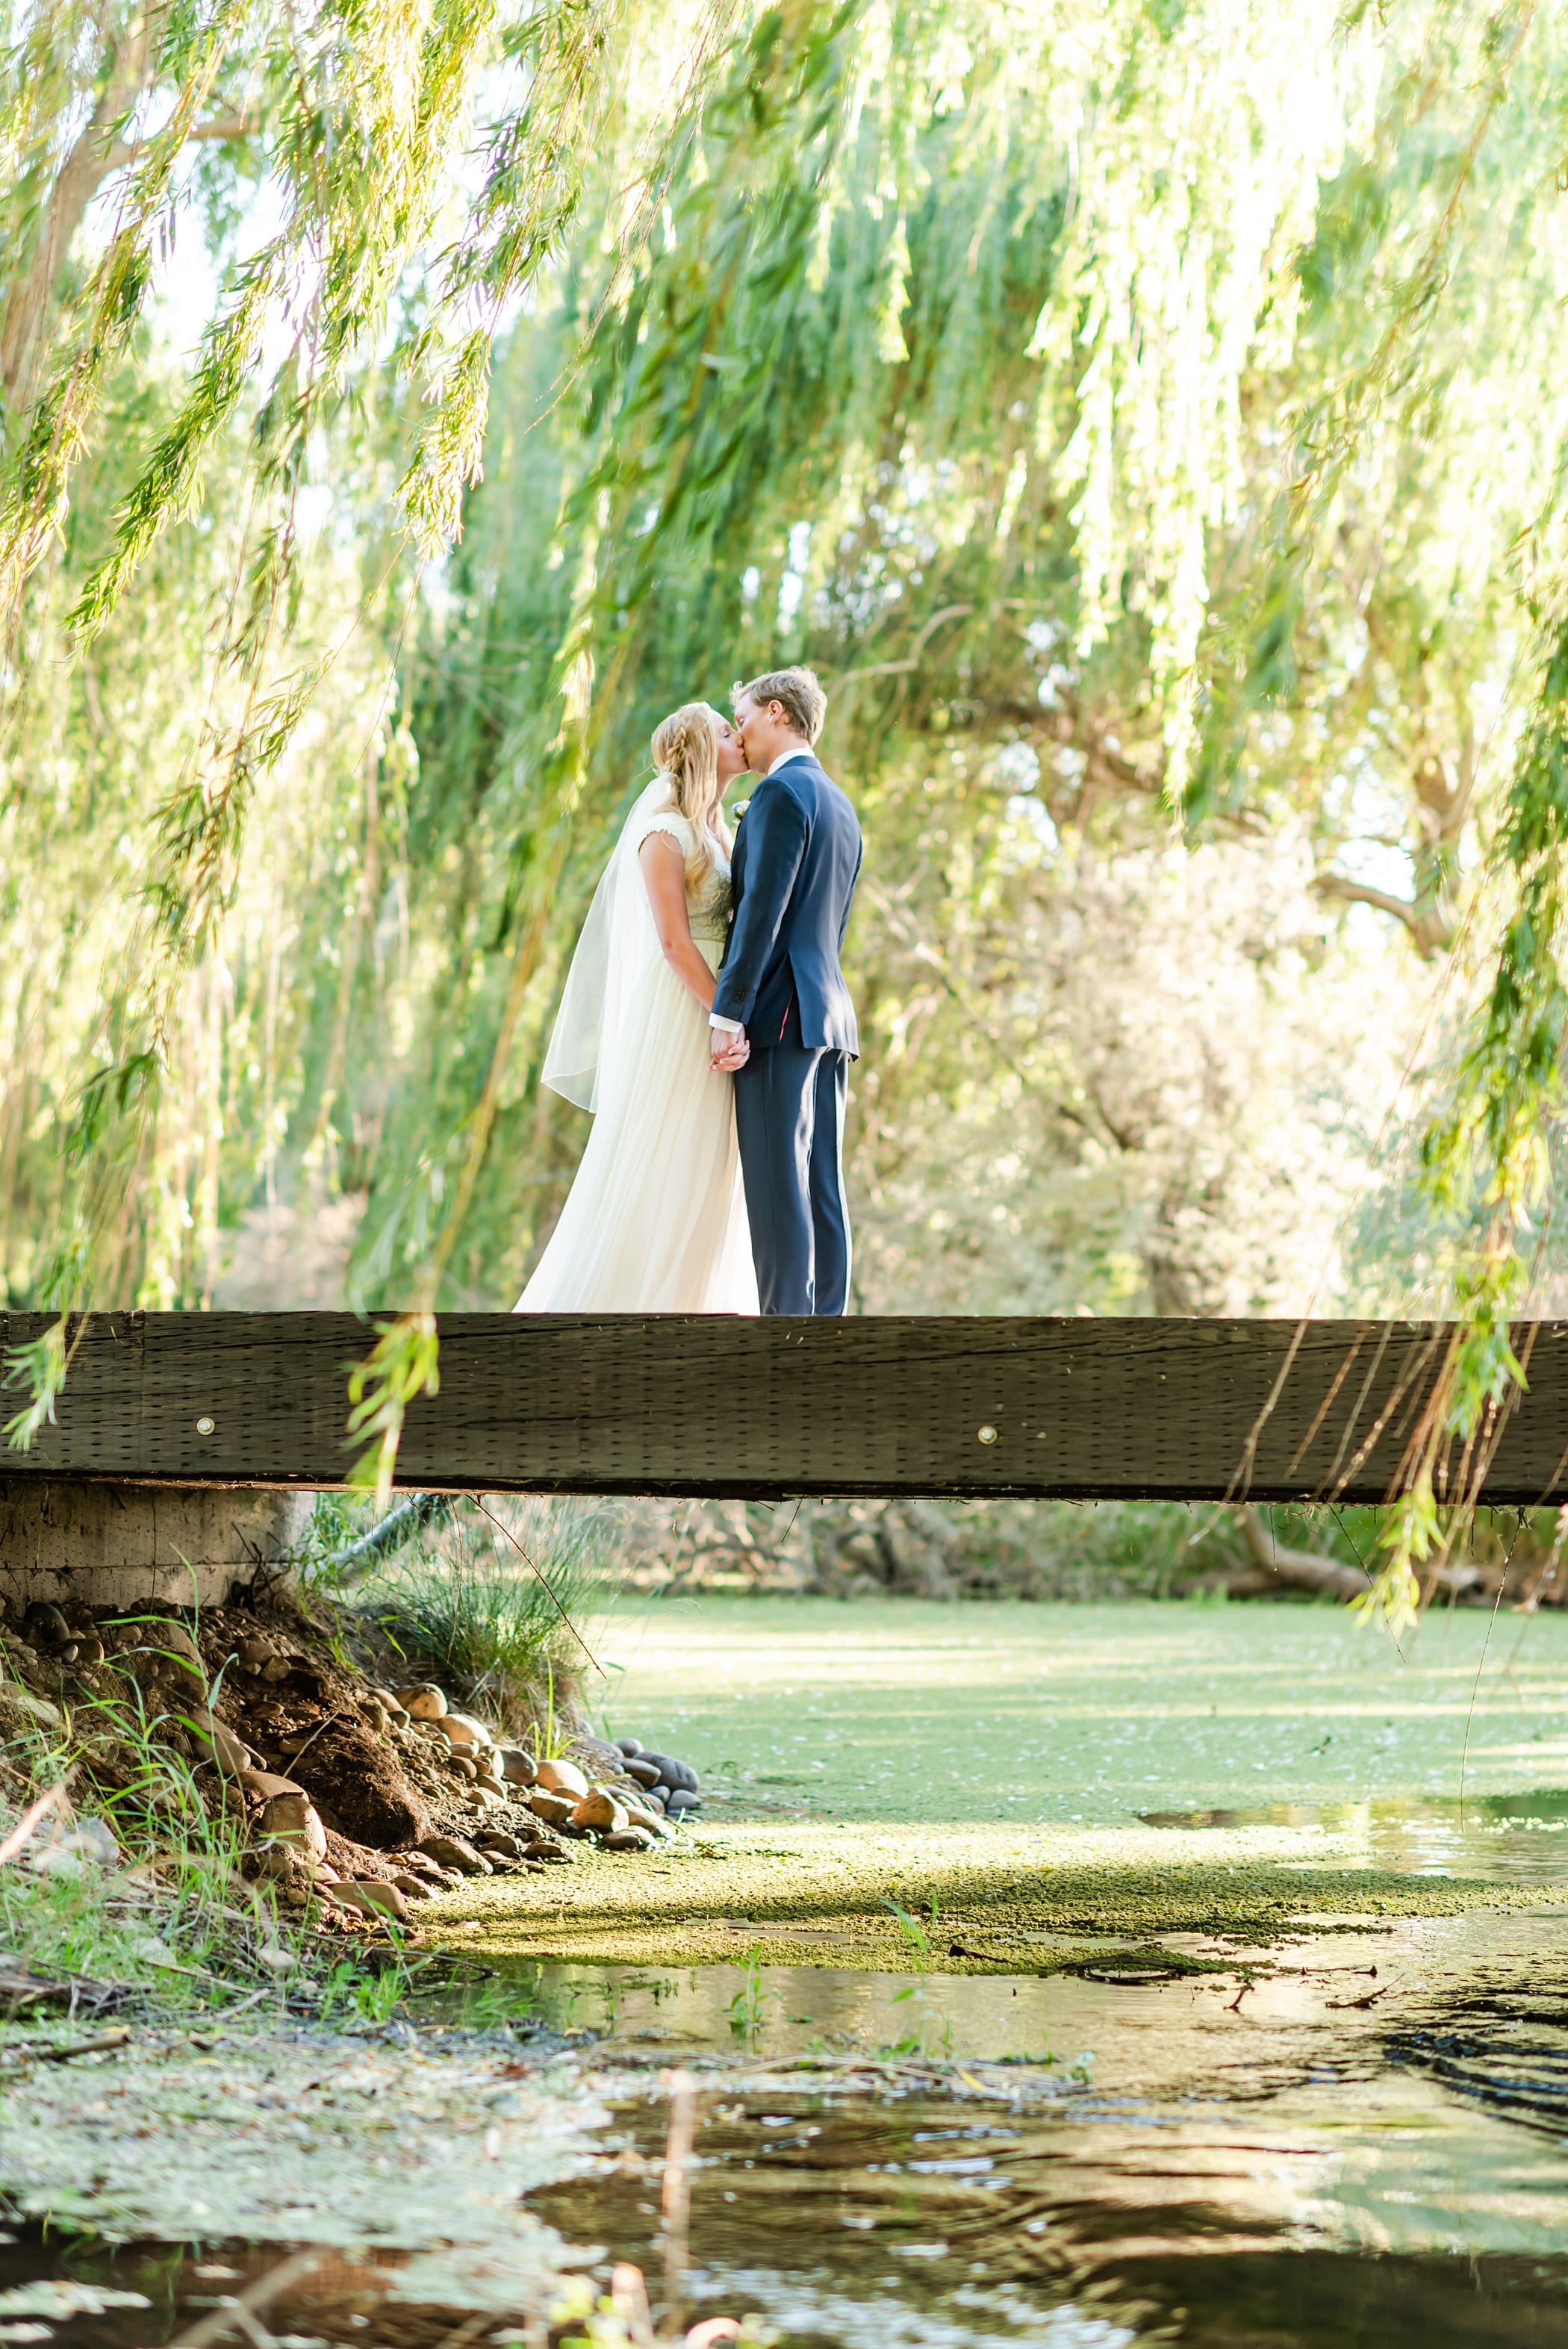 Bride and groom in willow trees